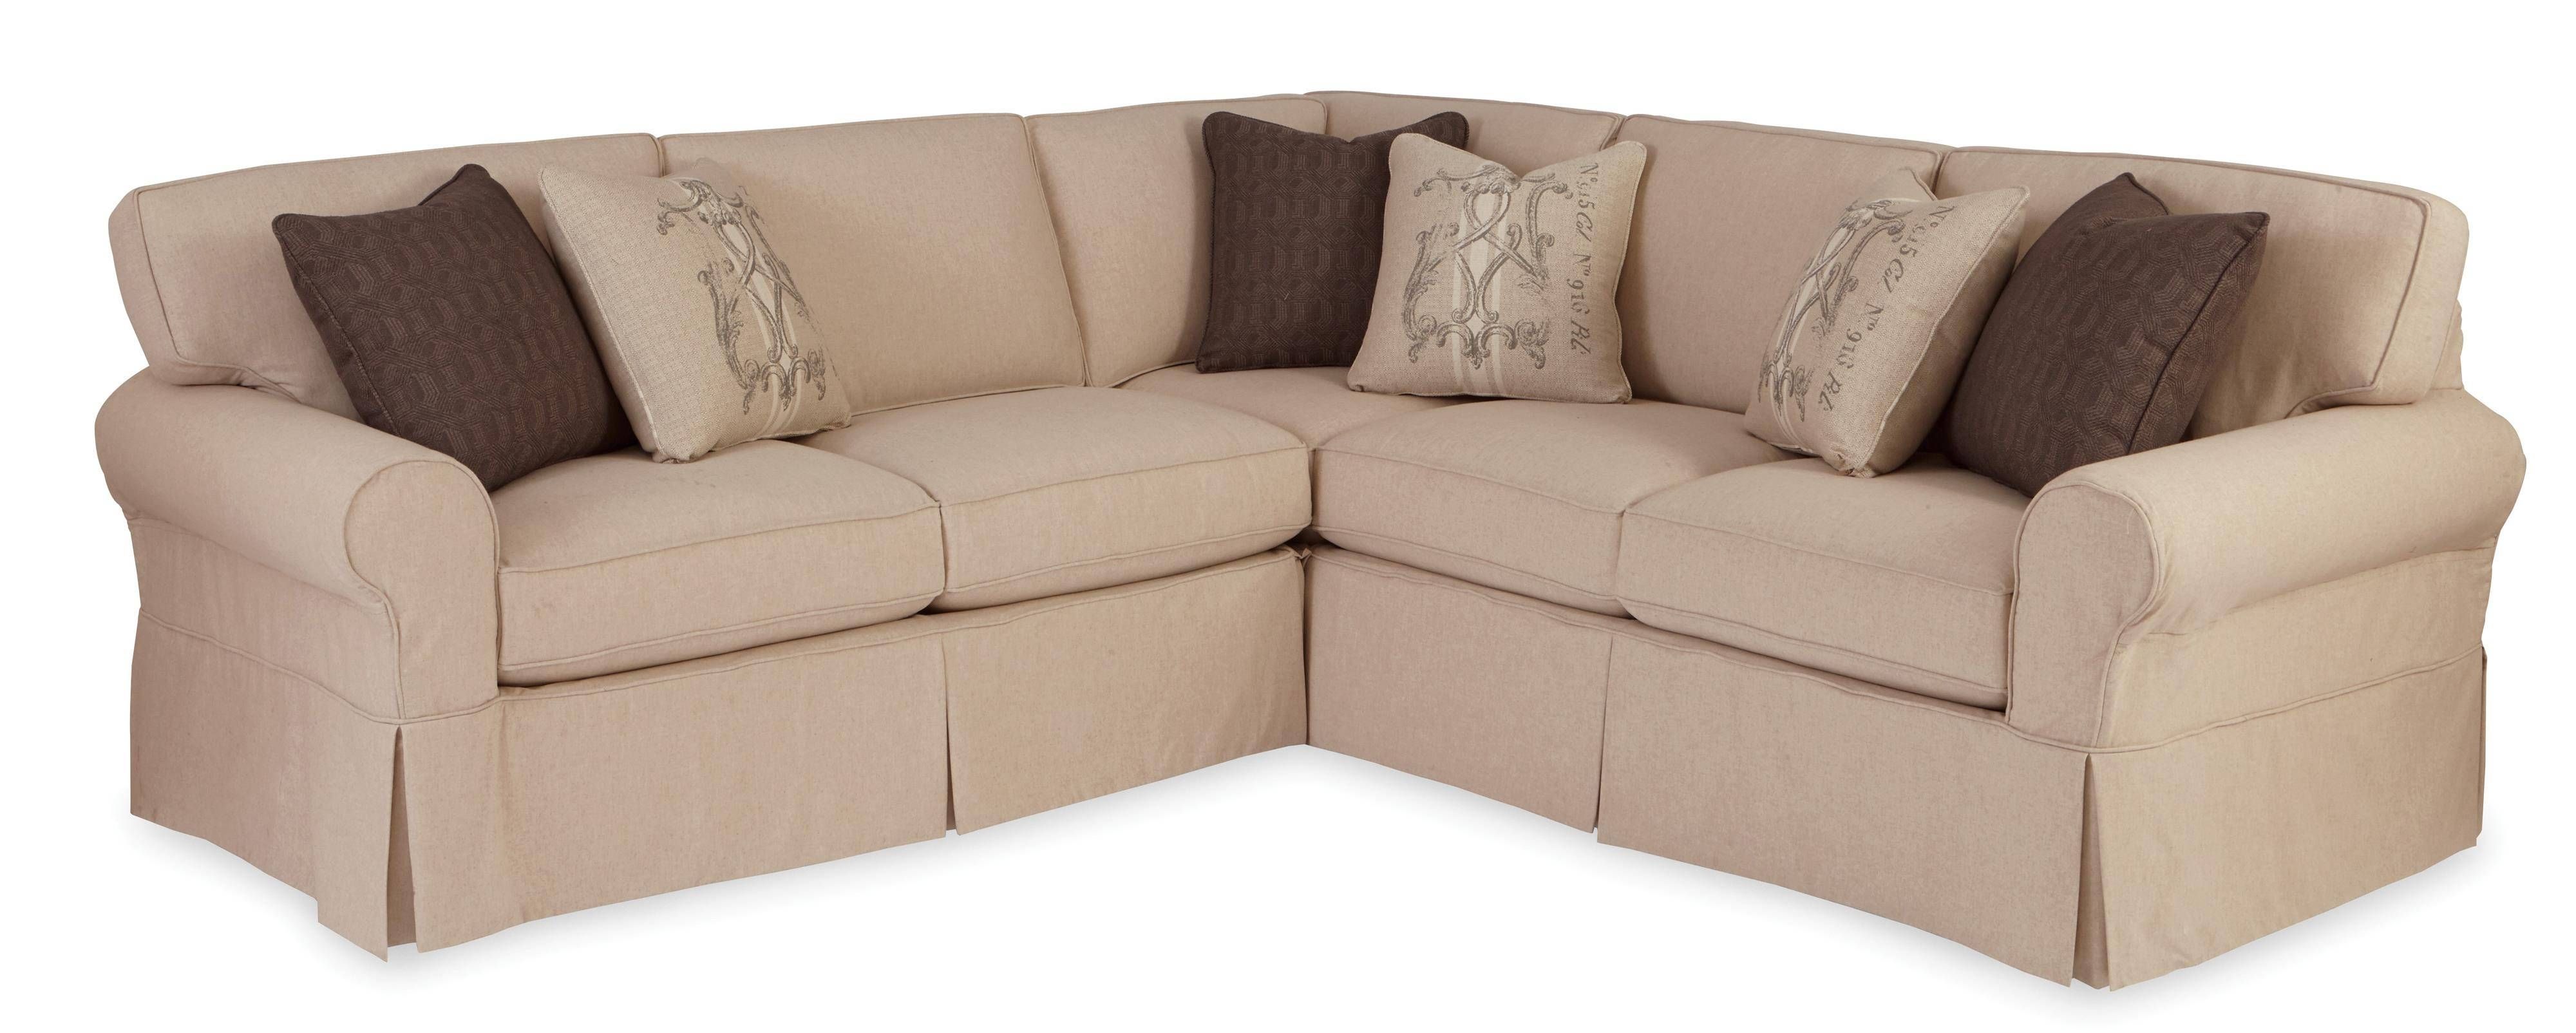 Two Piece Slipcovered Sectional Sofa With Raf Return Sofa For 10 Piece Sectional Sofa (Photo 152 of 299)